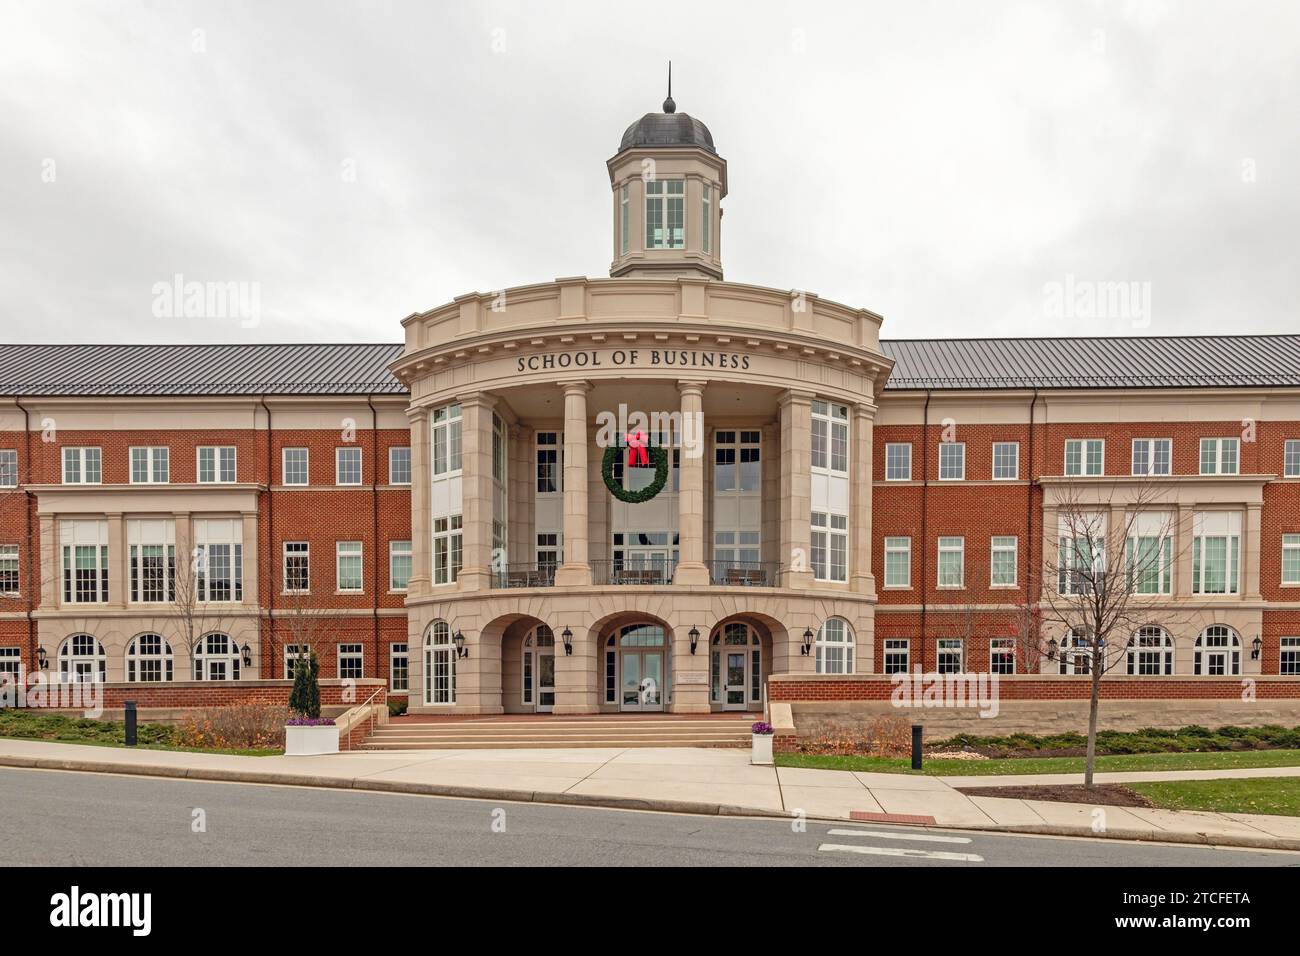 Lynchburg, Virginia - The School of Business at Liberty University. The private evangelical Christian university was founded by Jerry Falwell, Sr. and Stock Photo